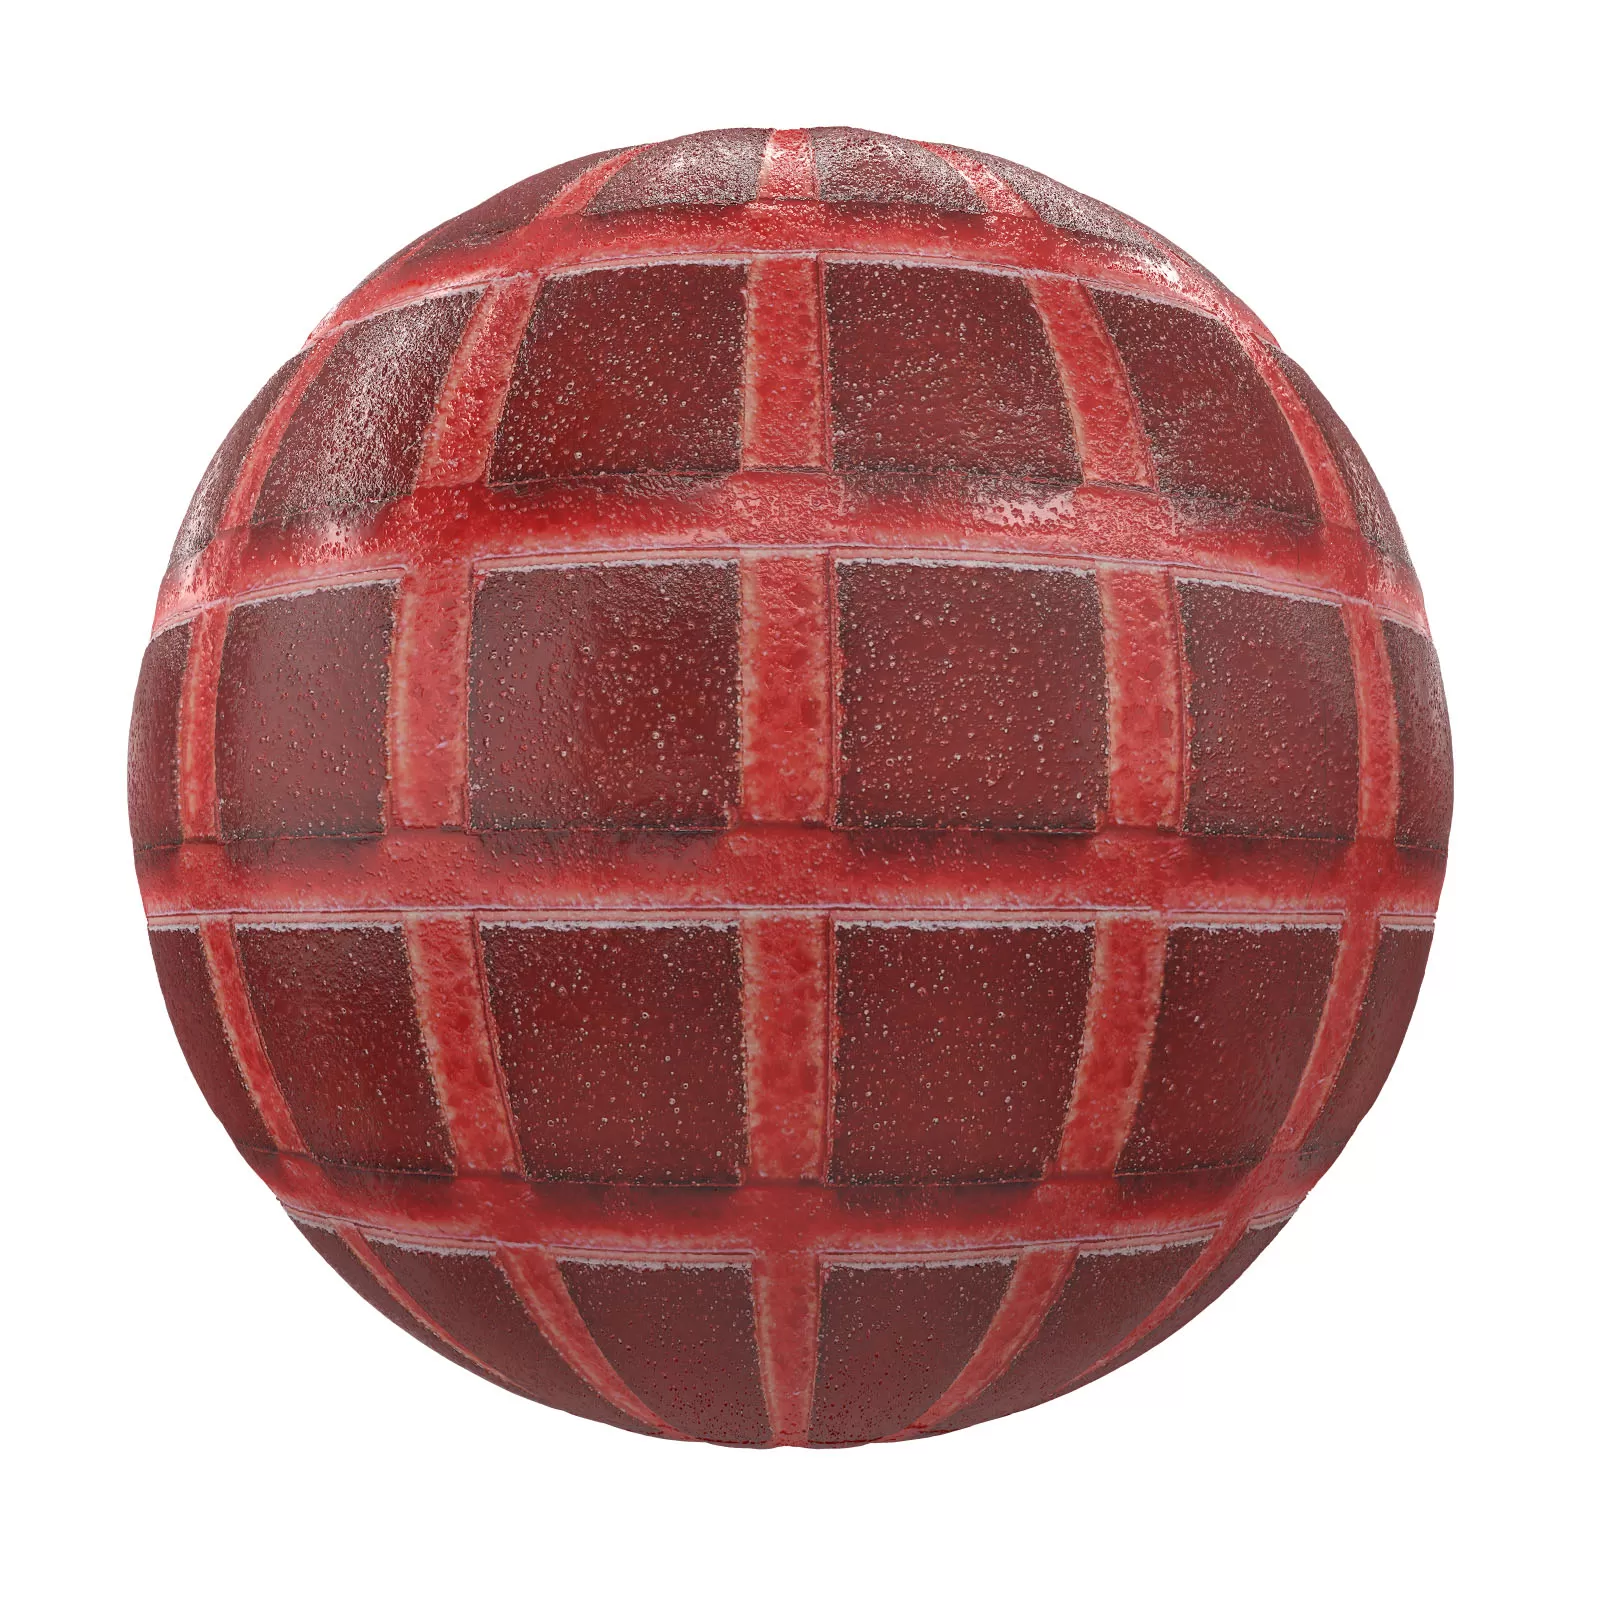 PBR CGAXIS TEXTURES – TILES – Red Tiles 1